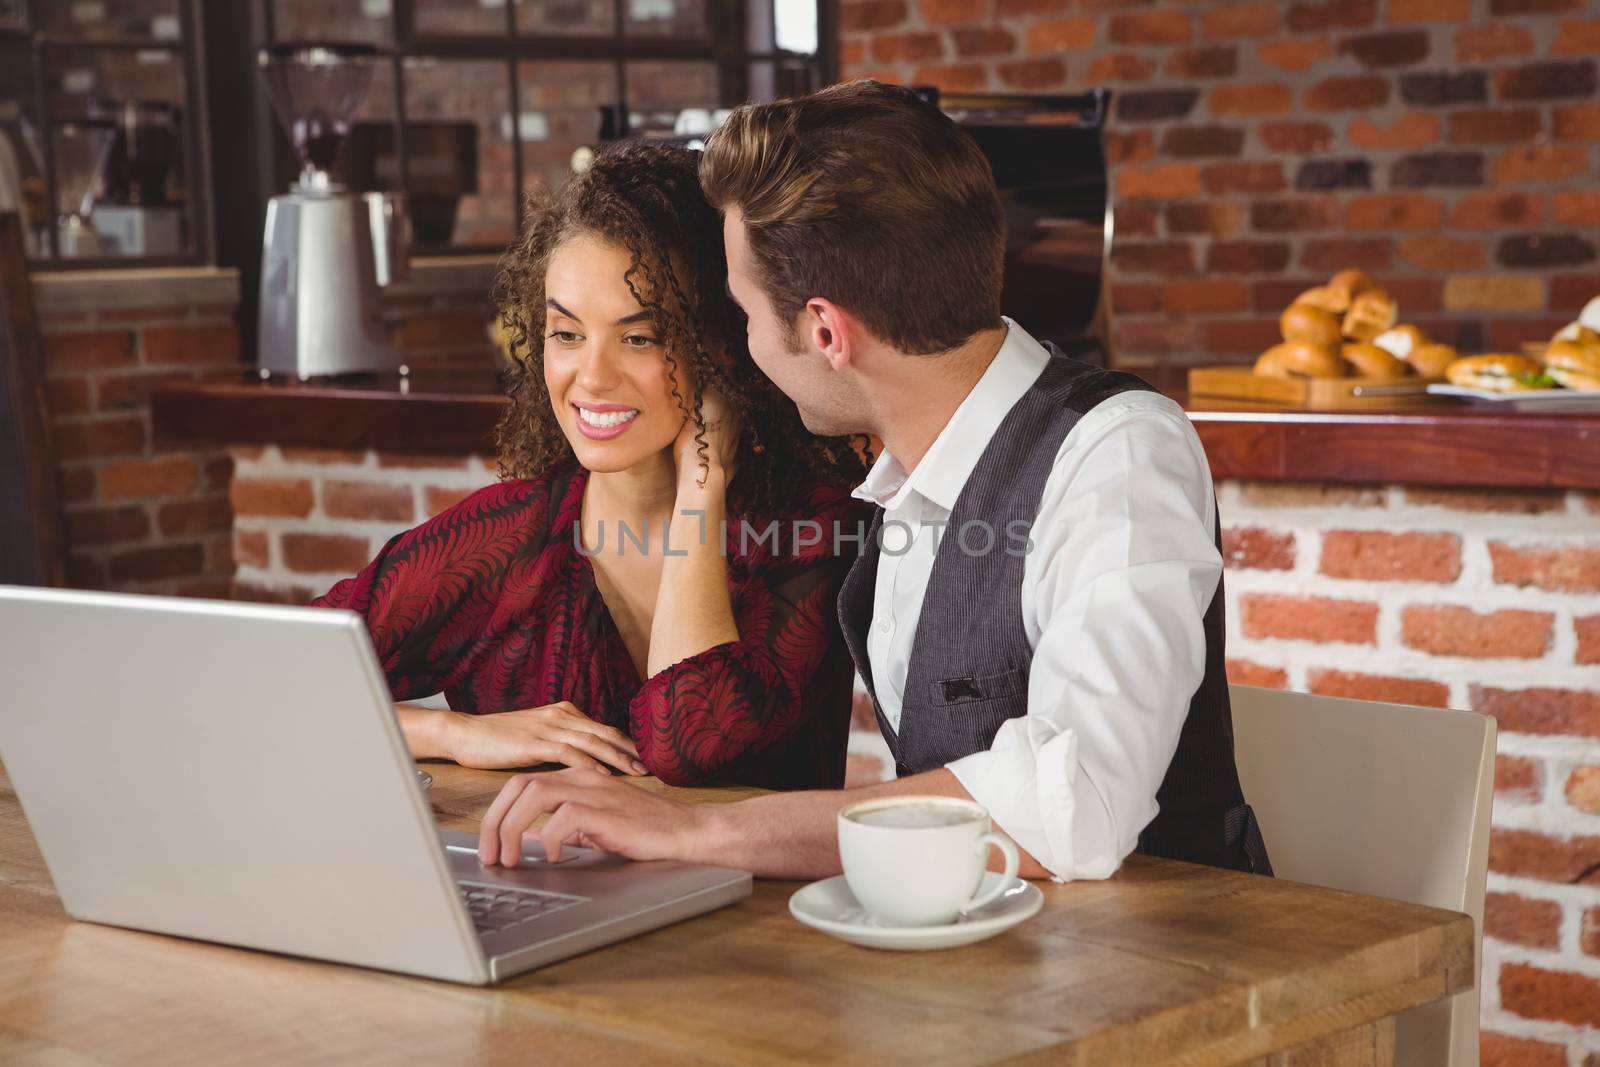 Cute couple on a date watching photos on a laptop at the cafe